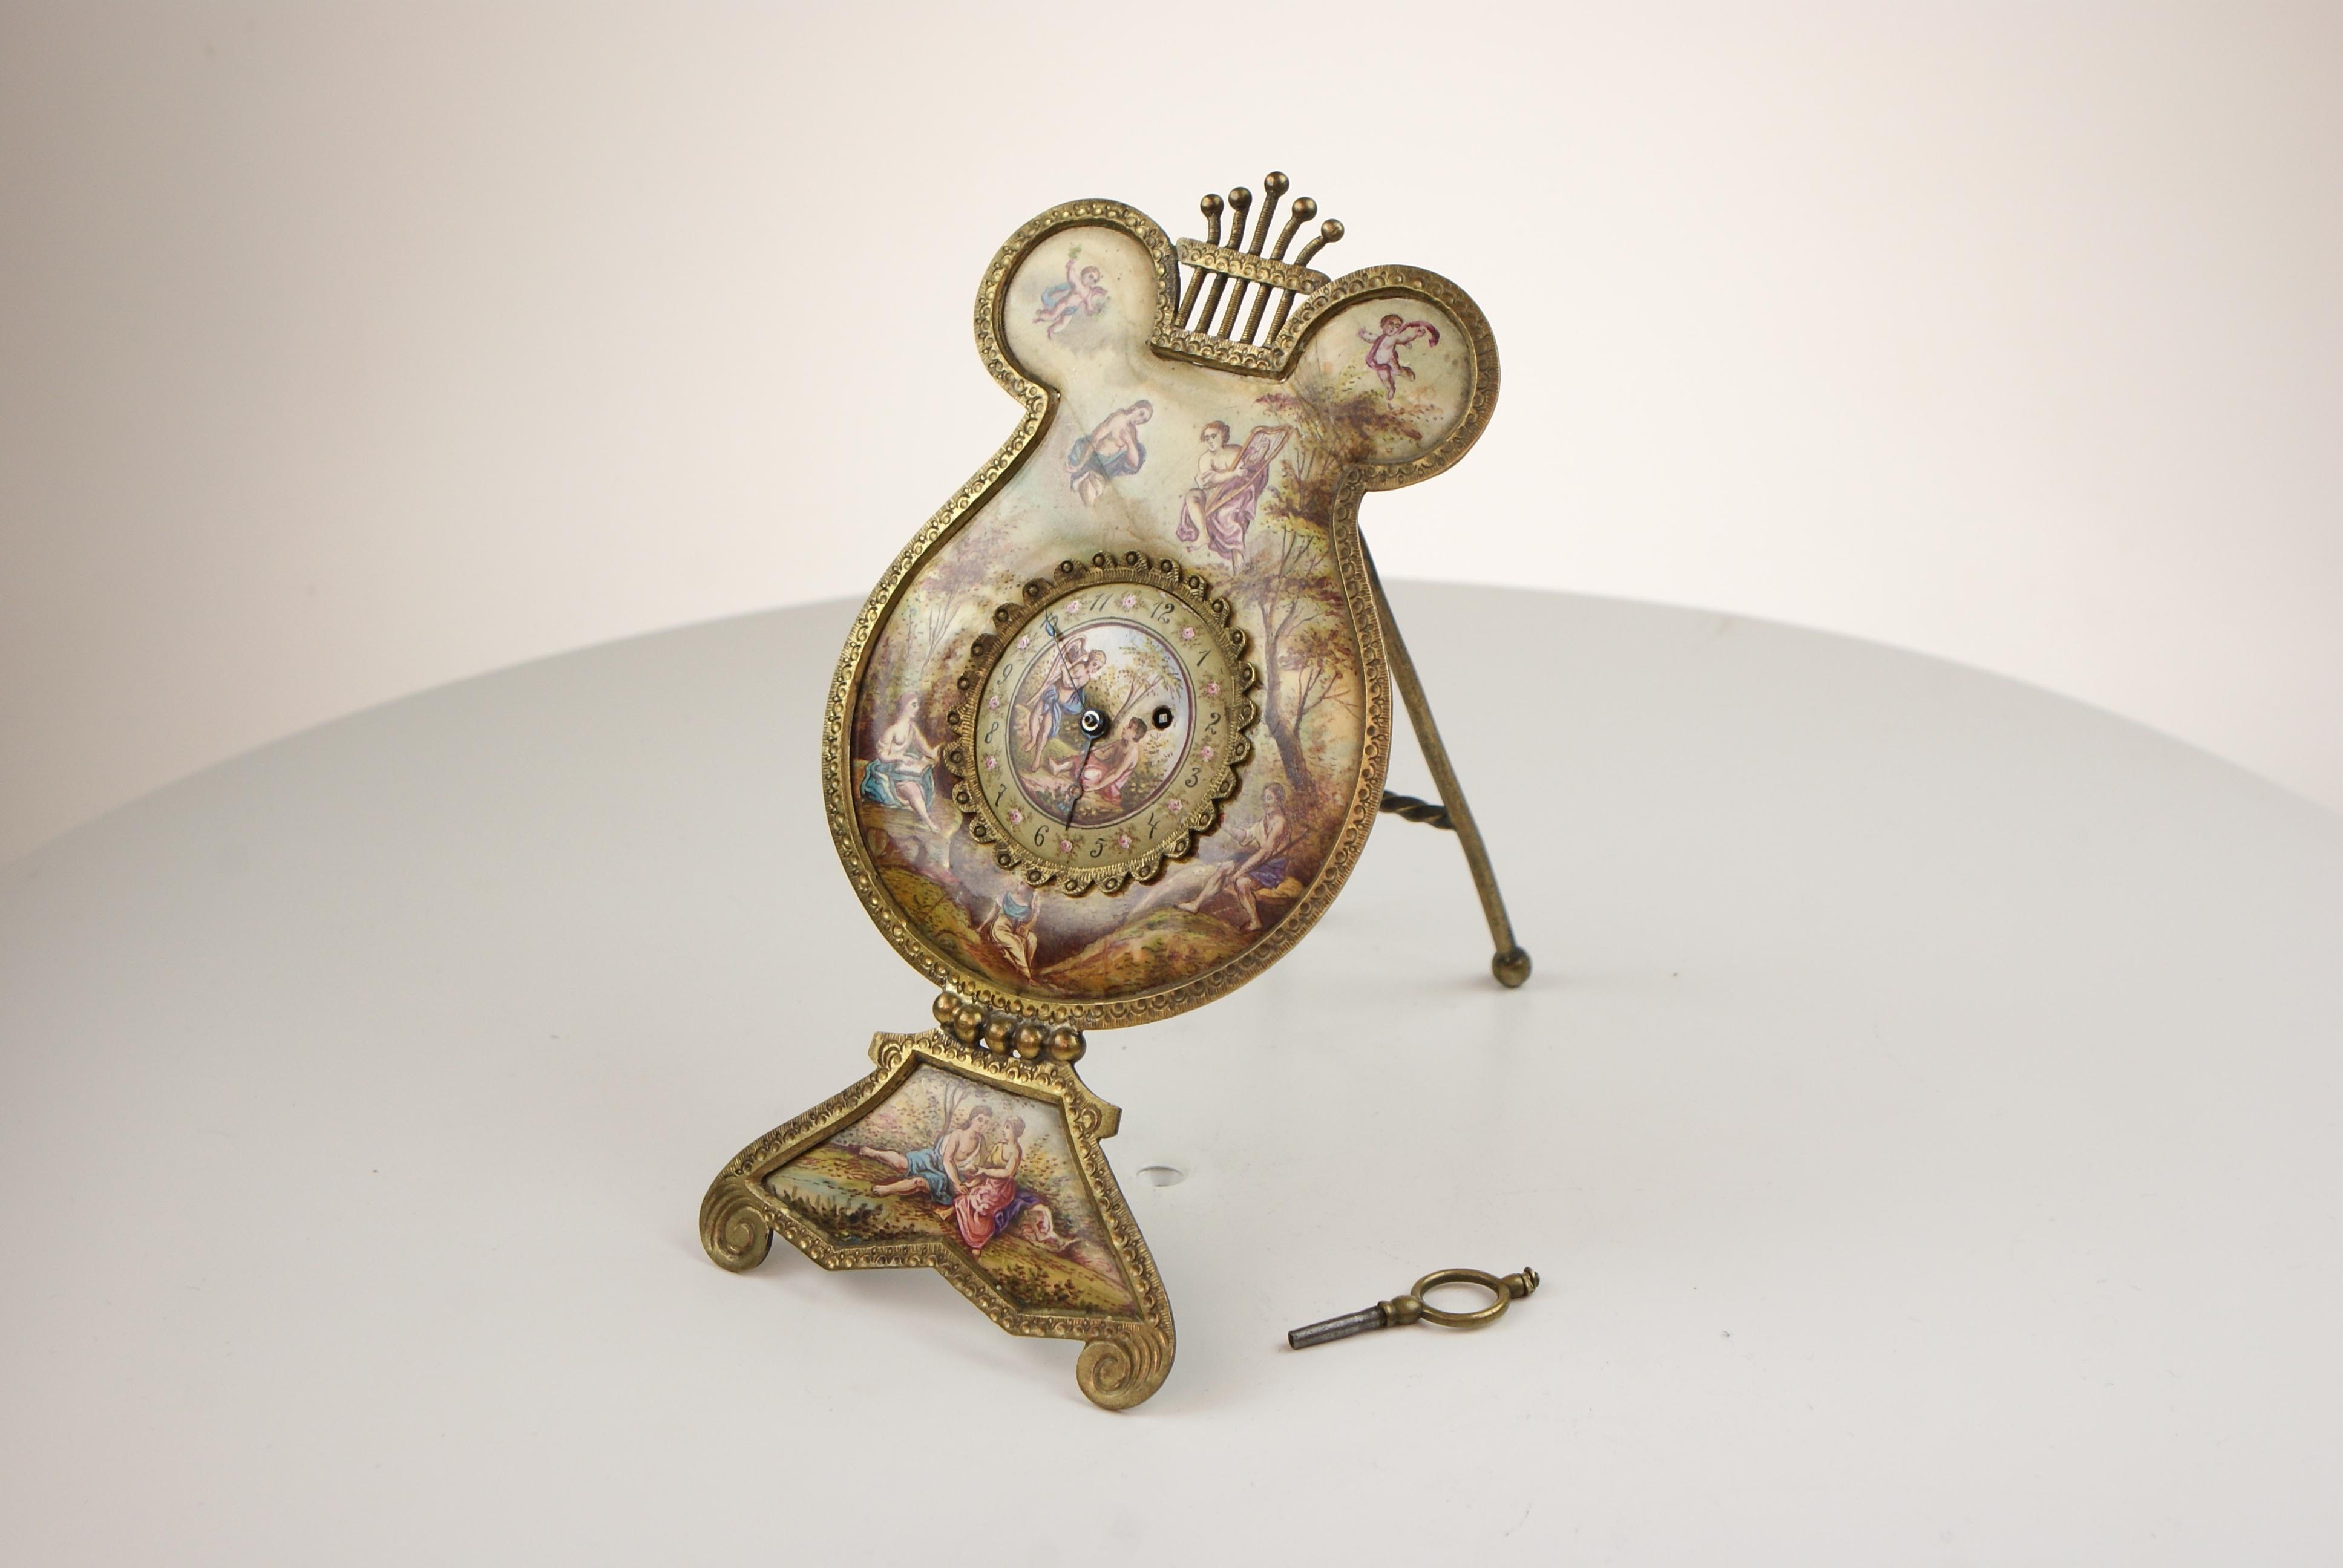 Antique Austrian Viennese hand painted enamel gilt metal lyre clock,

In the form of an artist palette on an easel painted with scenes of cherubs. The clock face similarly painted the numbered dial also painted with intimated roses. The back